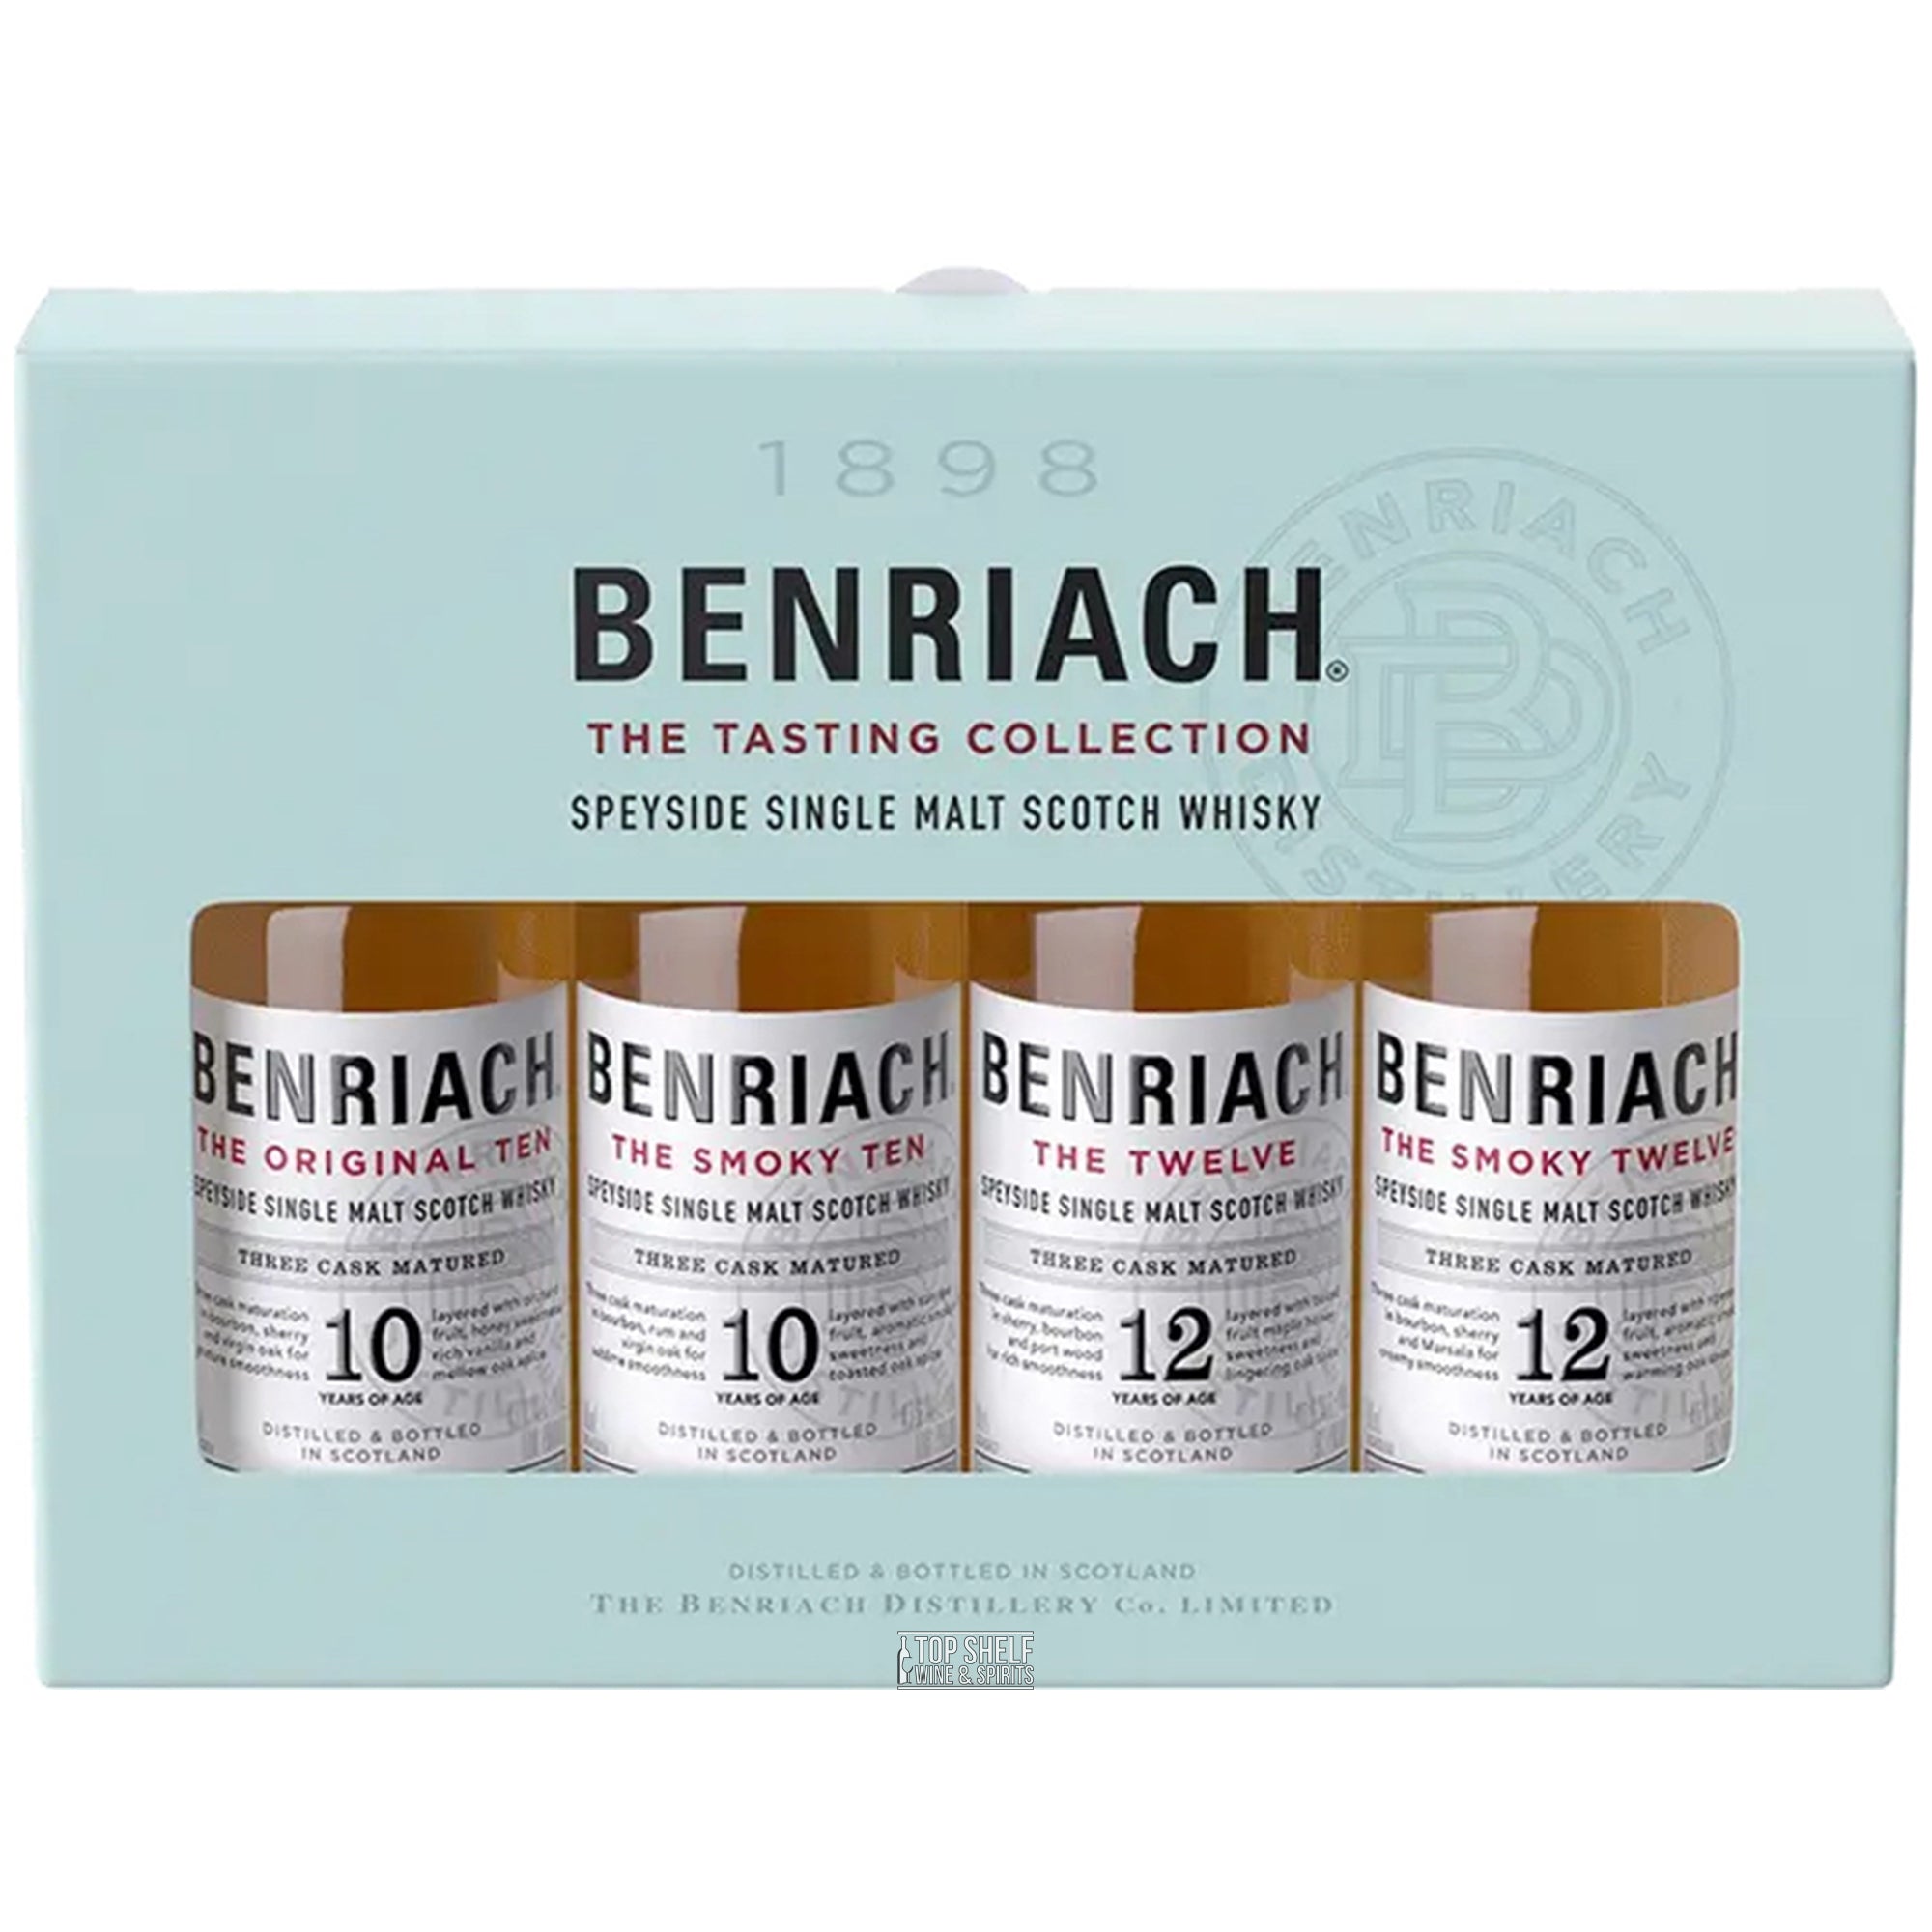 Benriach The Tasting Collection (4 Bottle Set)